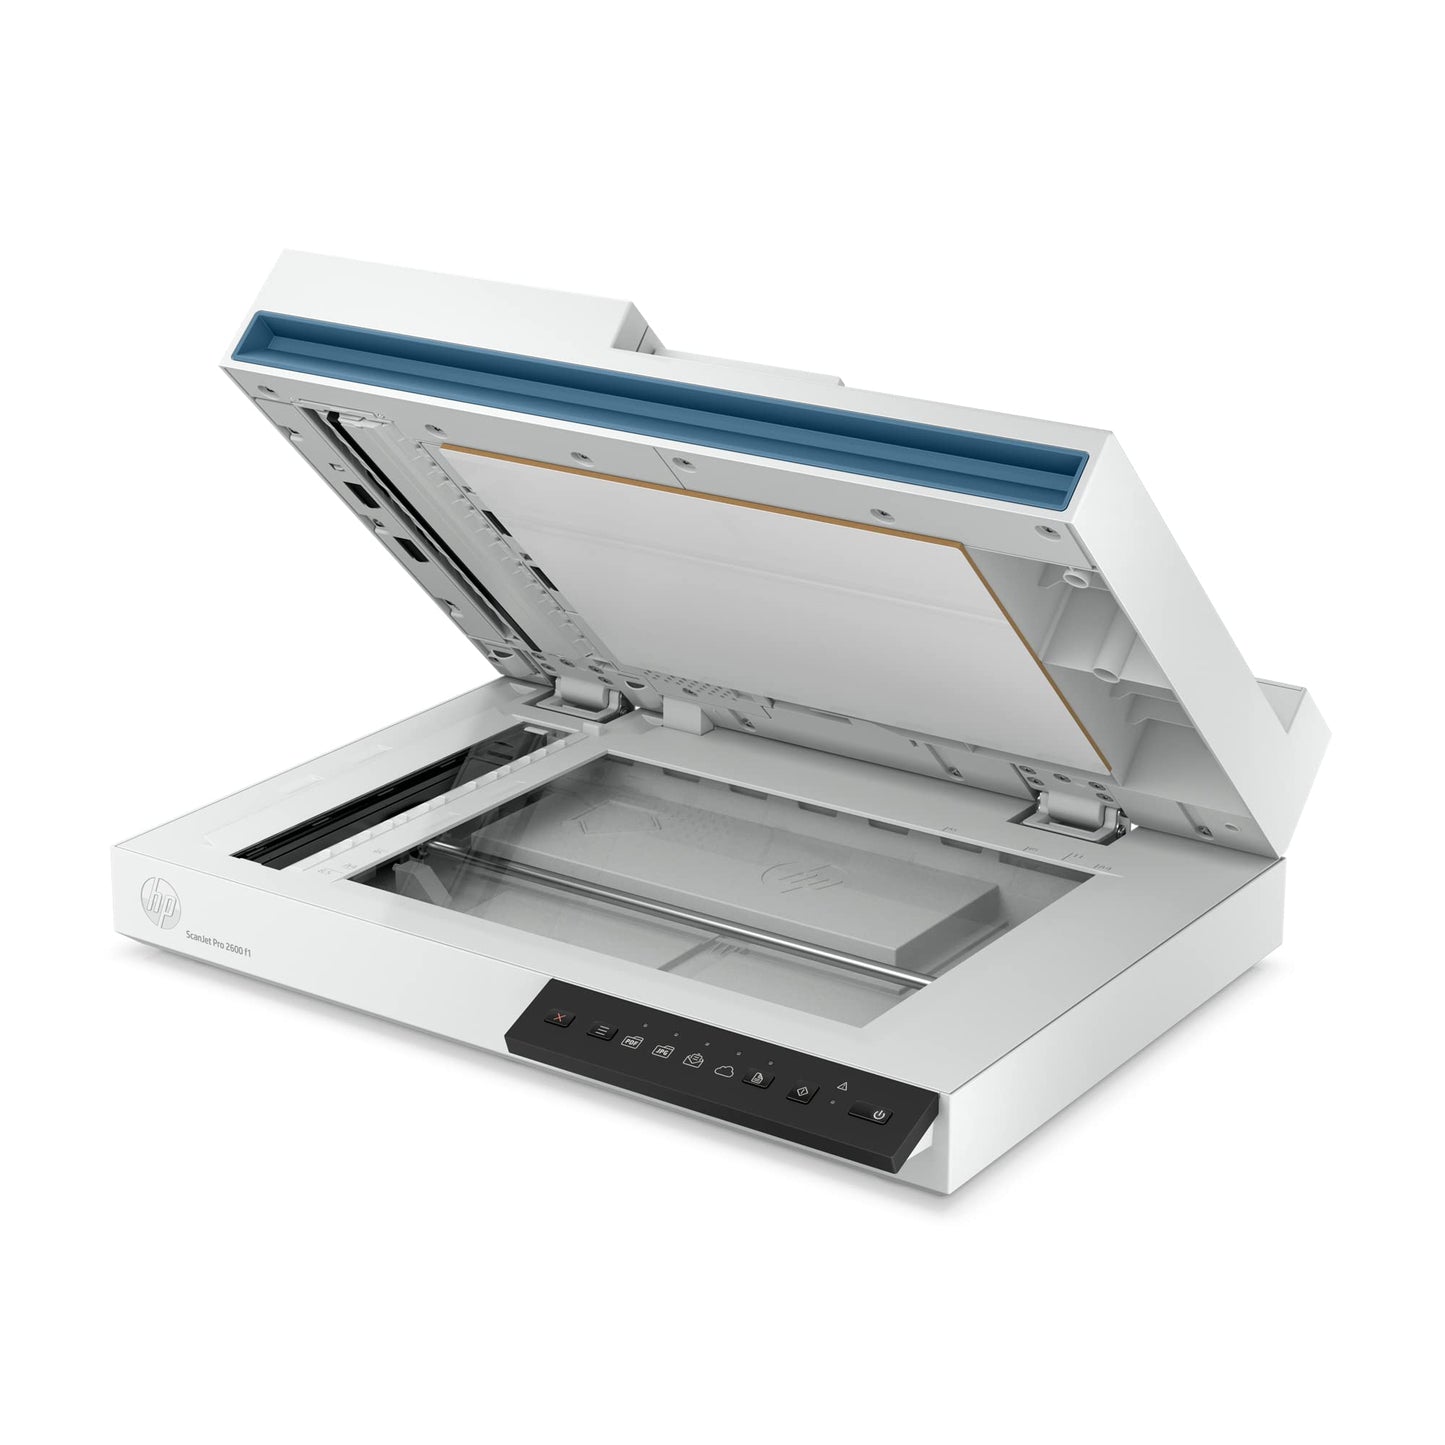 HP ScanJet Pro 2600 f1, Fast 2-Sided scanning and auto Document Feeder (20G05A)